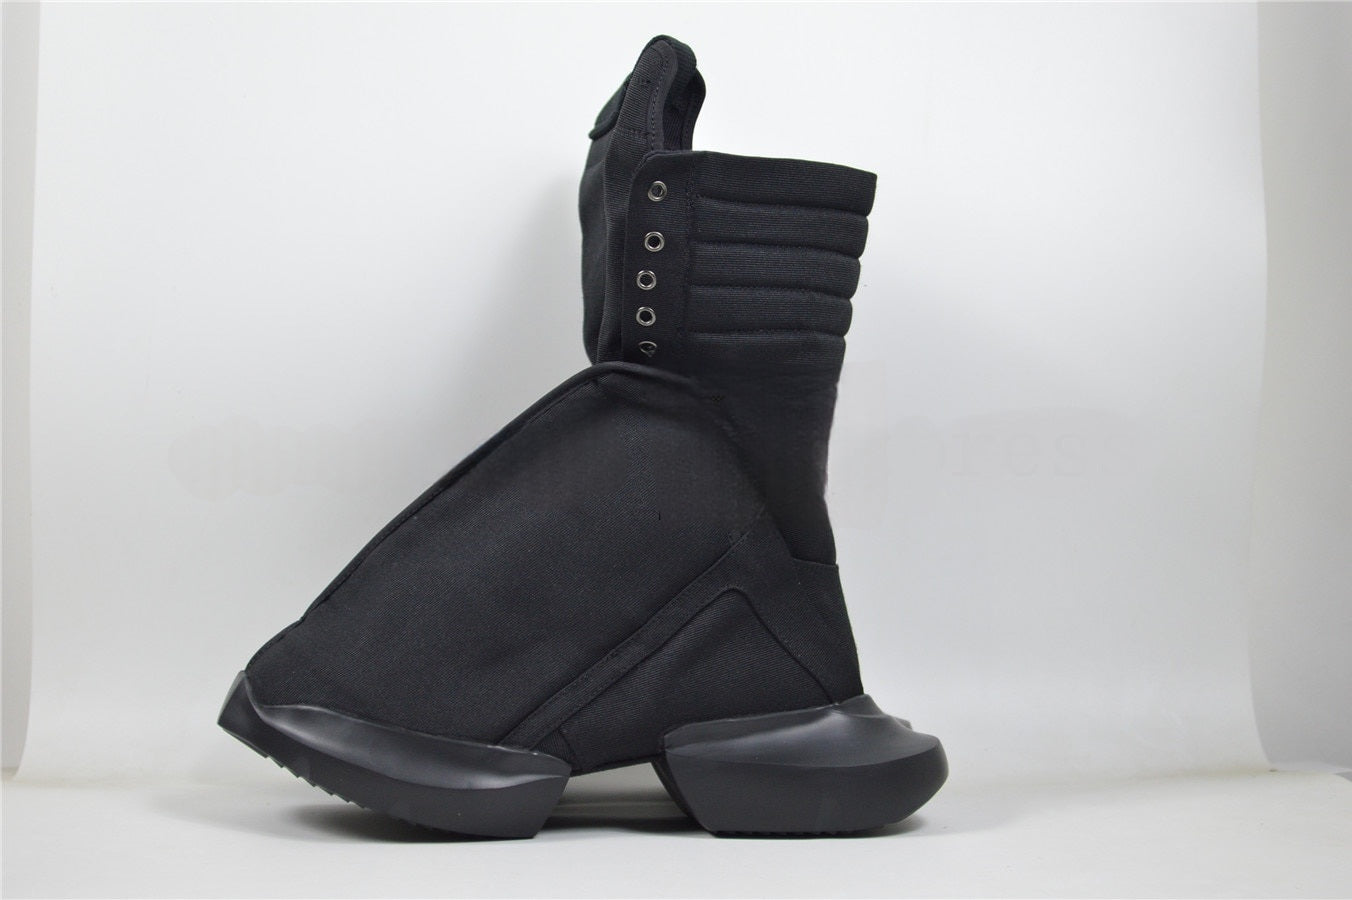 Illusion High Boot - Shoes